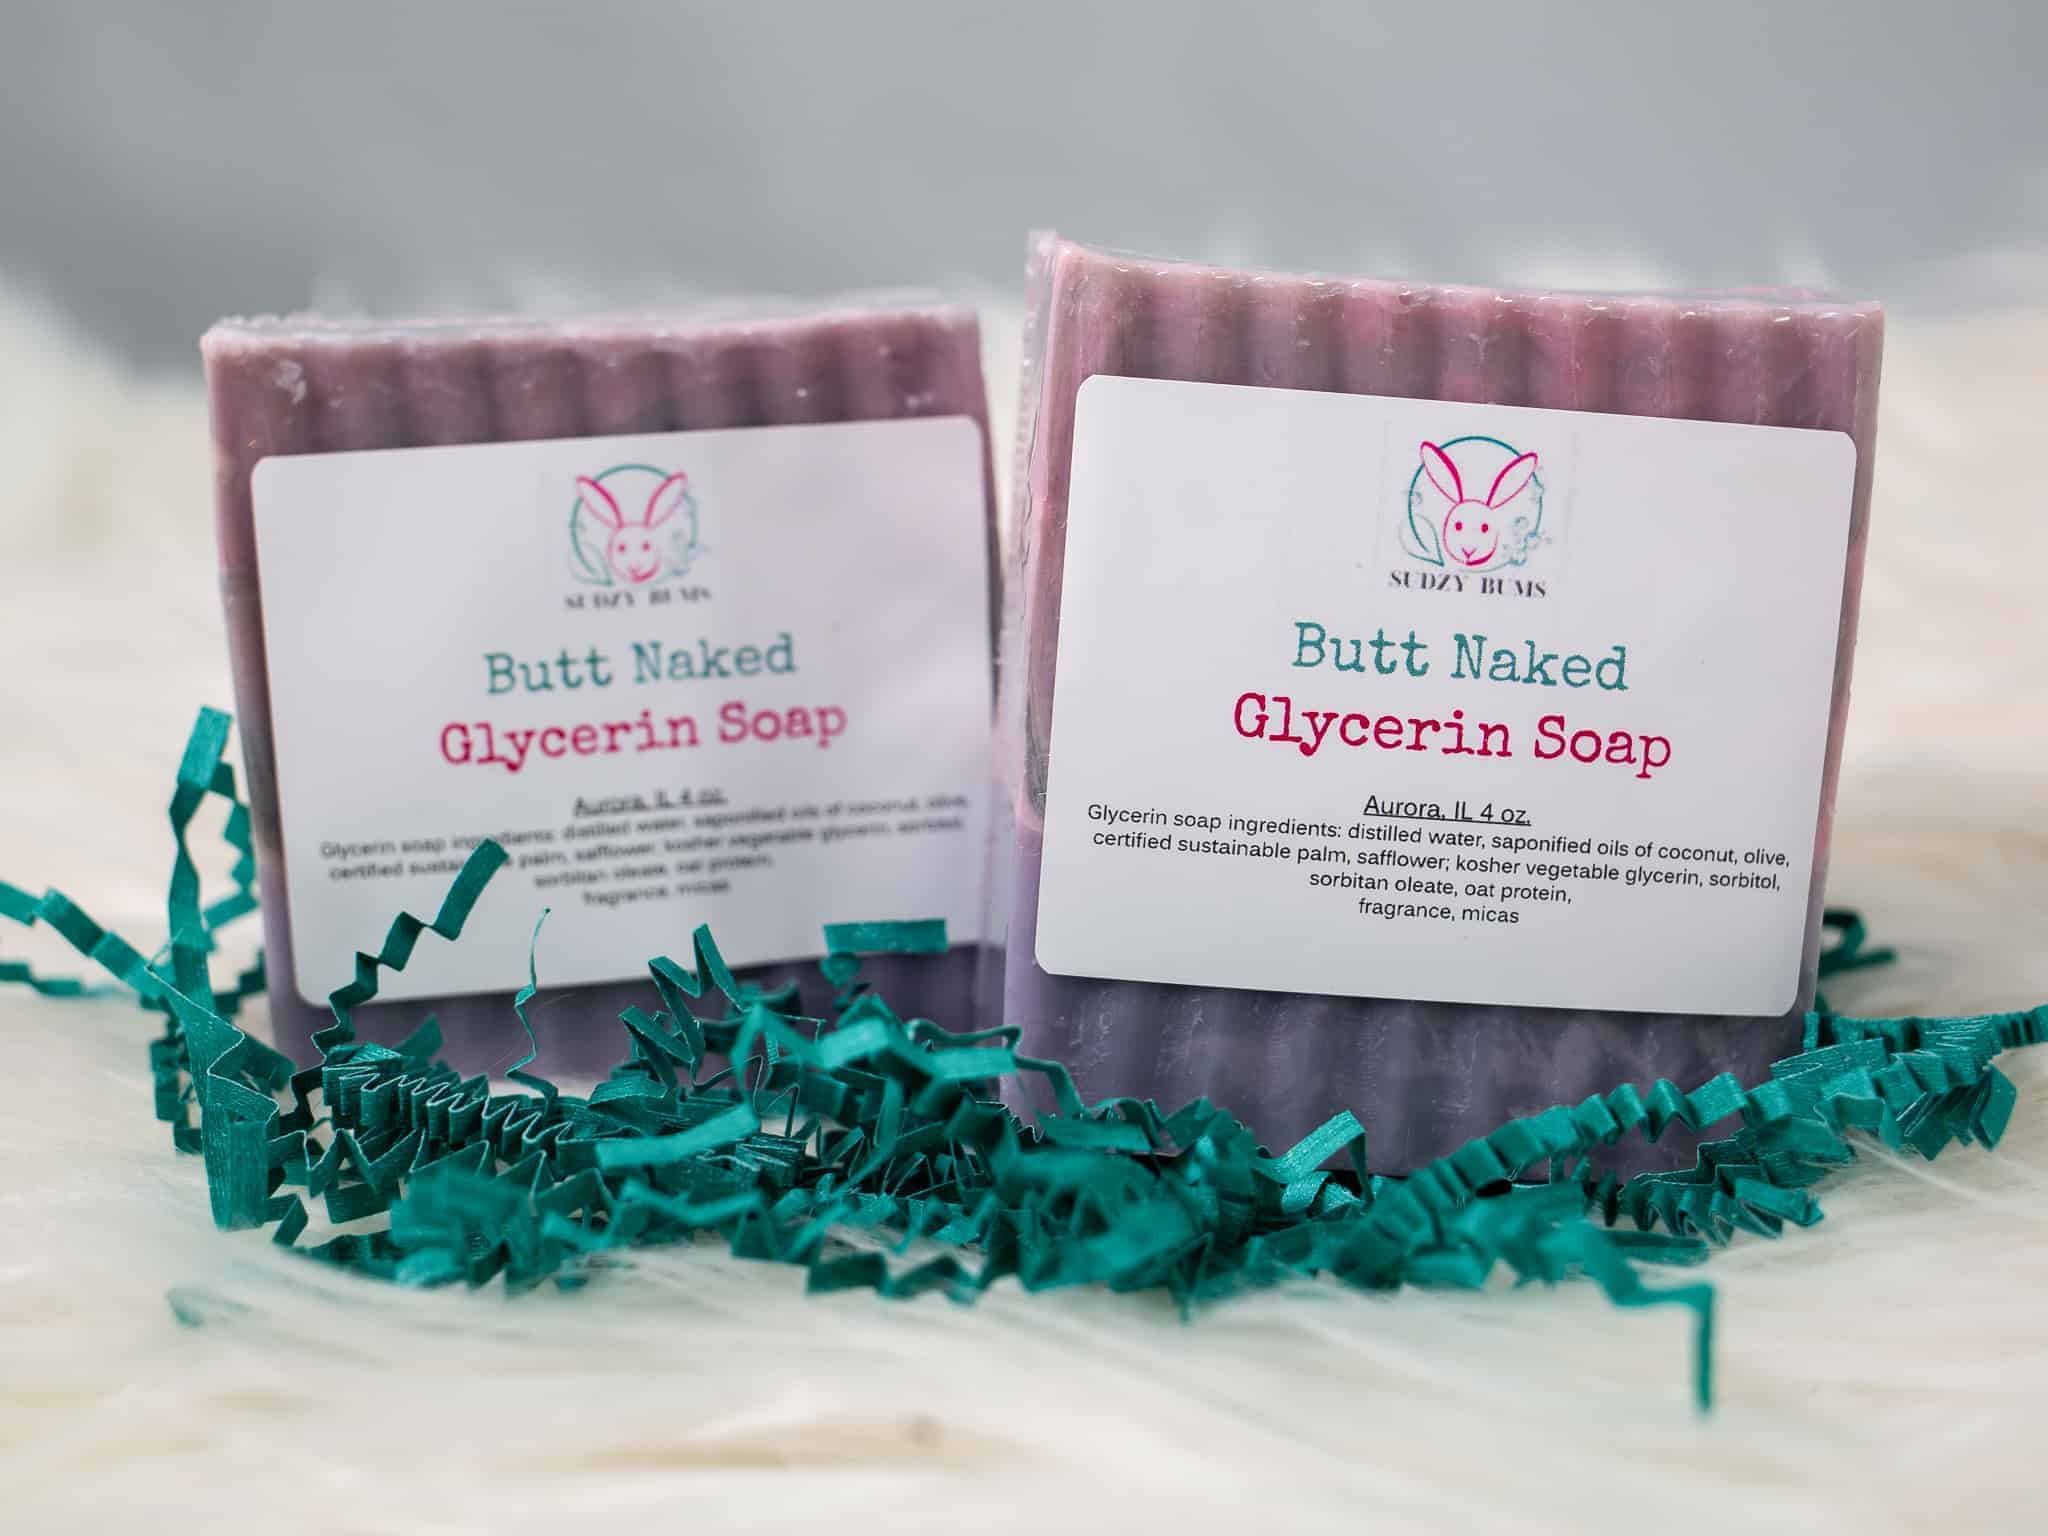 This Butt Naked Vegan Glycerin soap is made with love by Sudzy Bums! Shop more unique gift ideas today with Spots Initiatives, the best way to support creators.